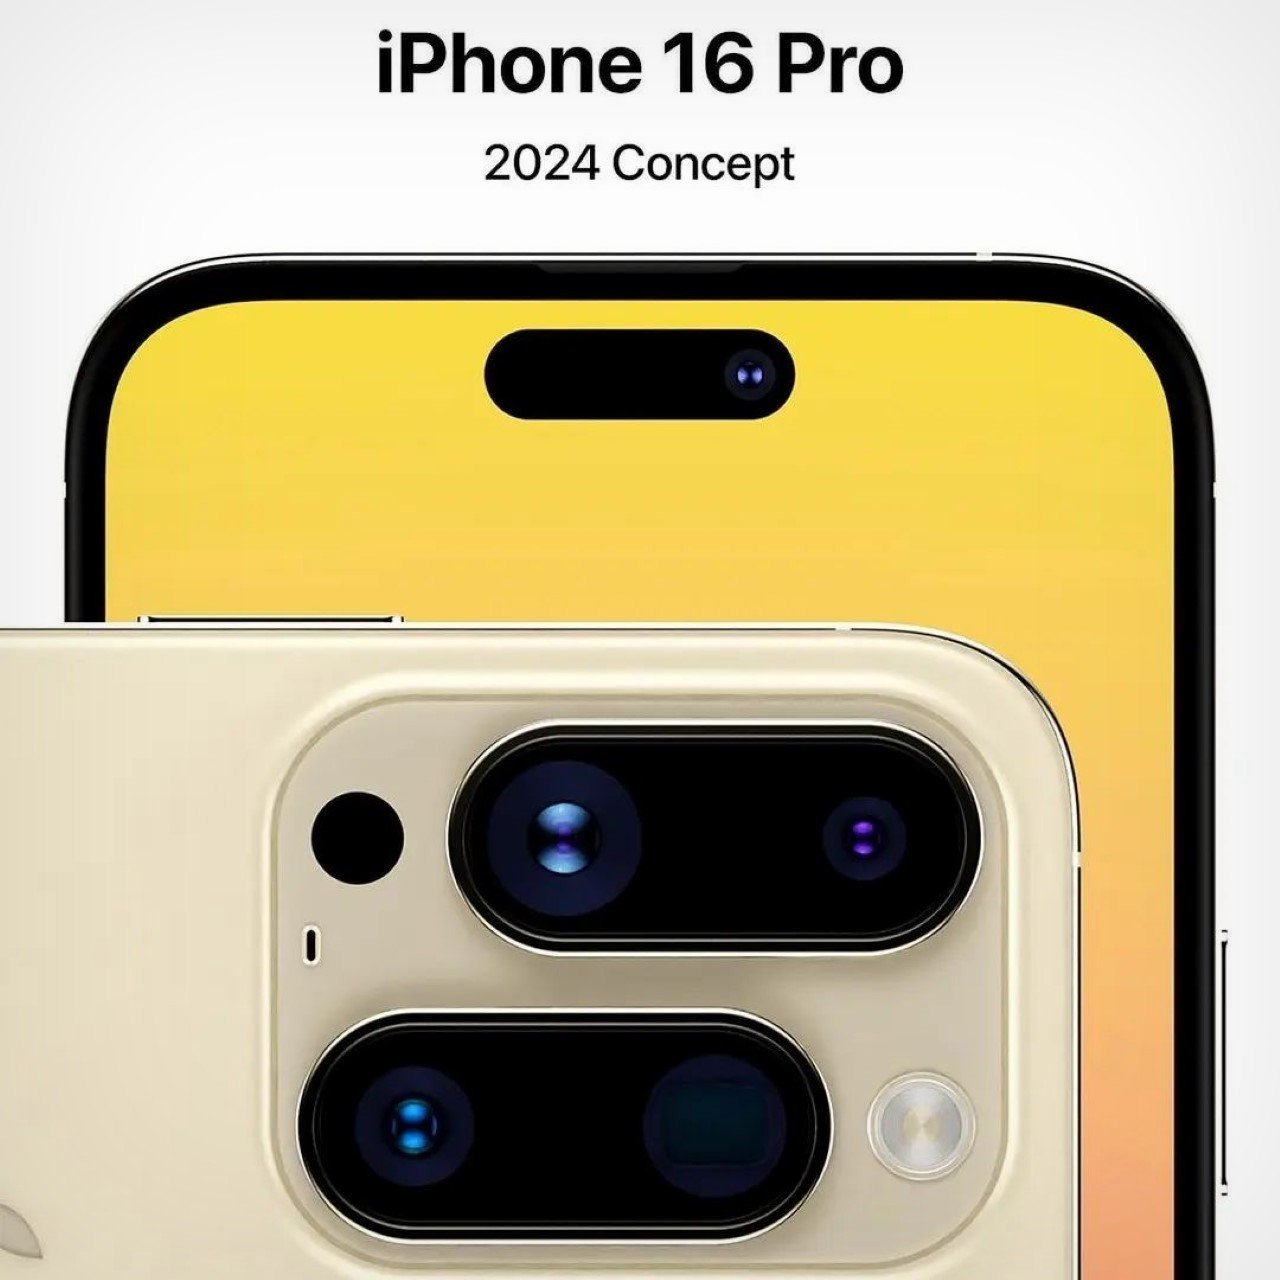 iPhone 16 Pro renders surface online with staggered 4-lens camera system